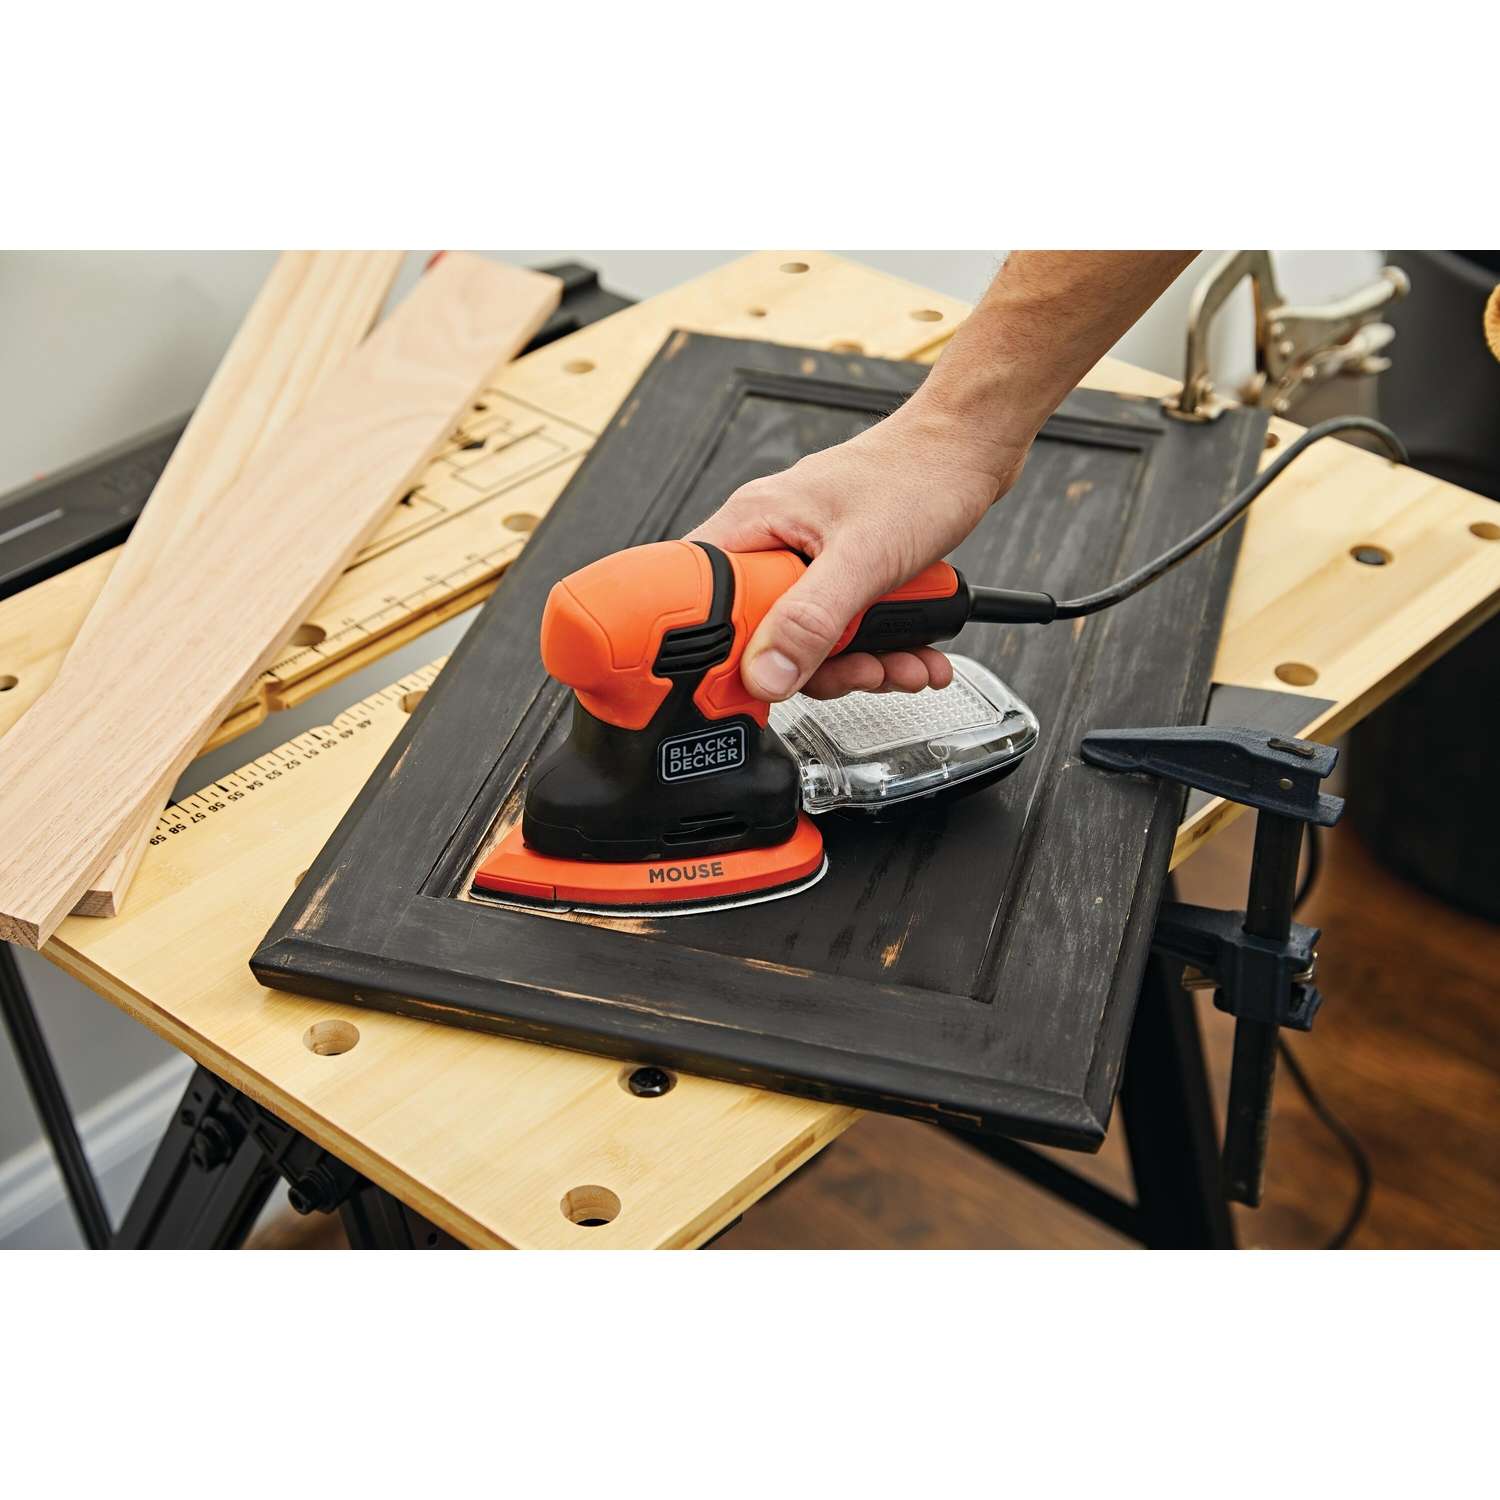 Black and decker sander teardown and review 